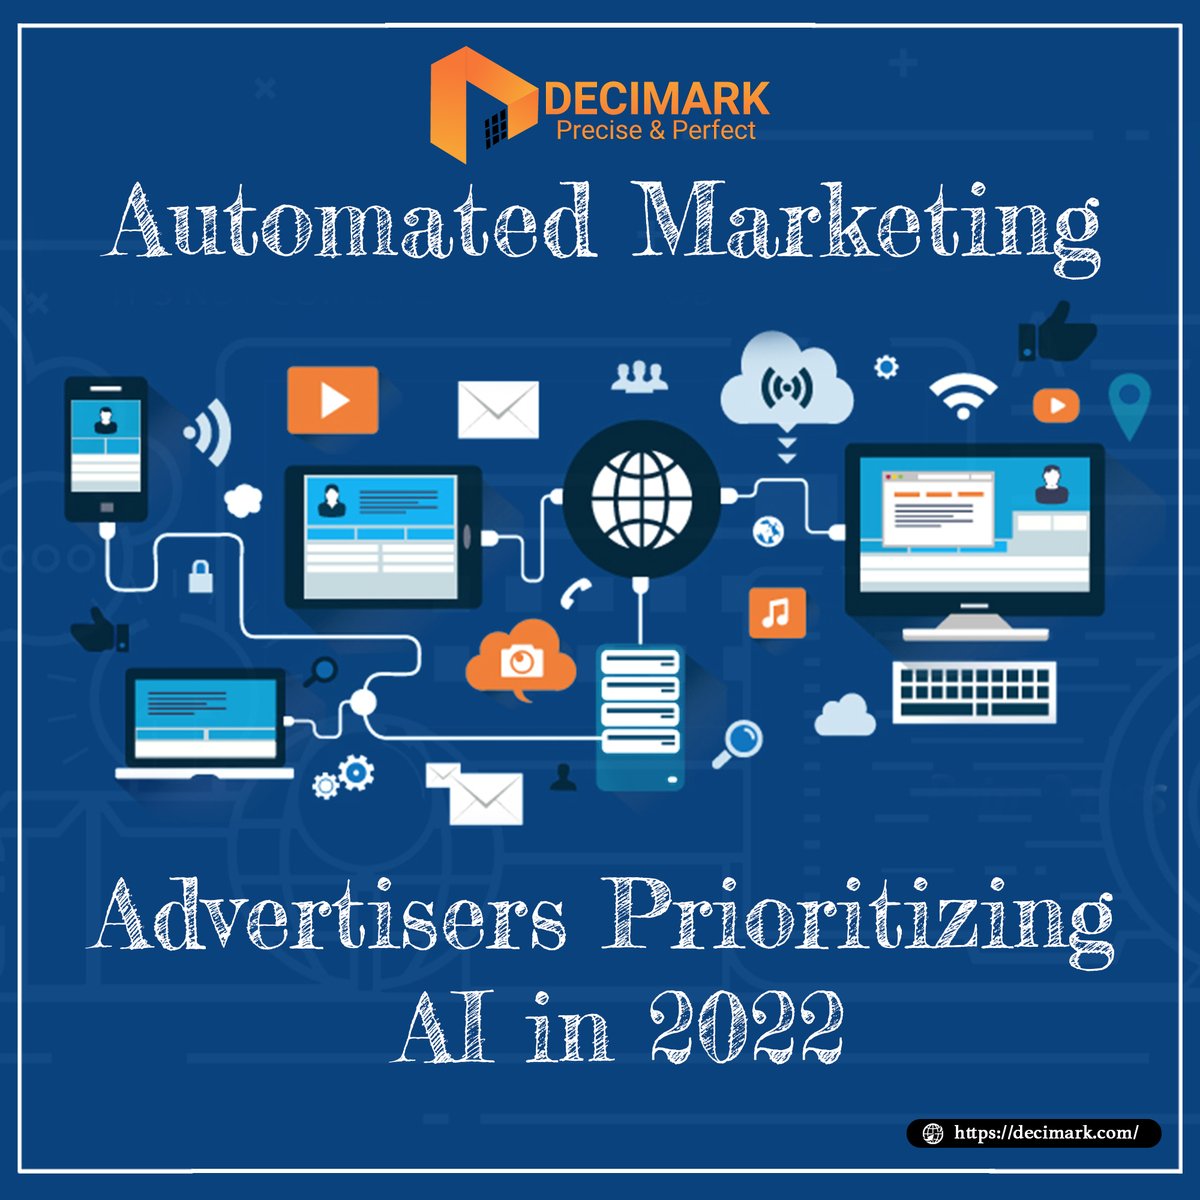 Surveys show that #marketers are looking for #AutomatedSolutions using #AI and #DeepLearning to boost #CustomerAcquisition in 2022. #DECIMARK